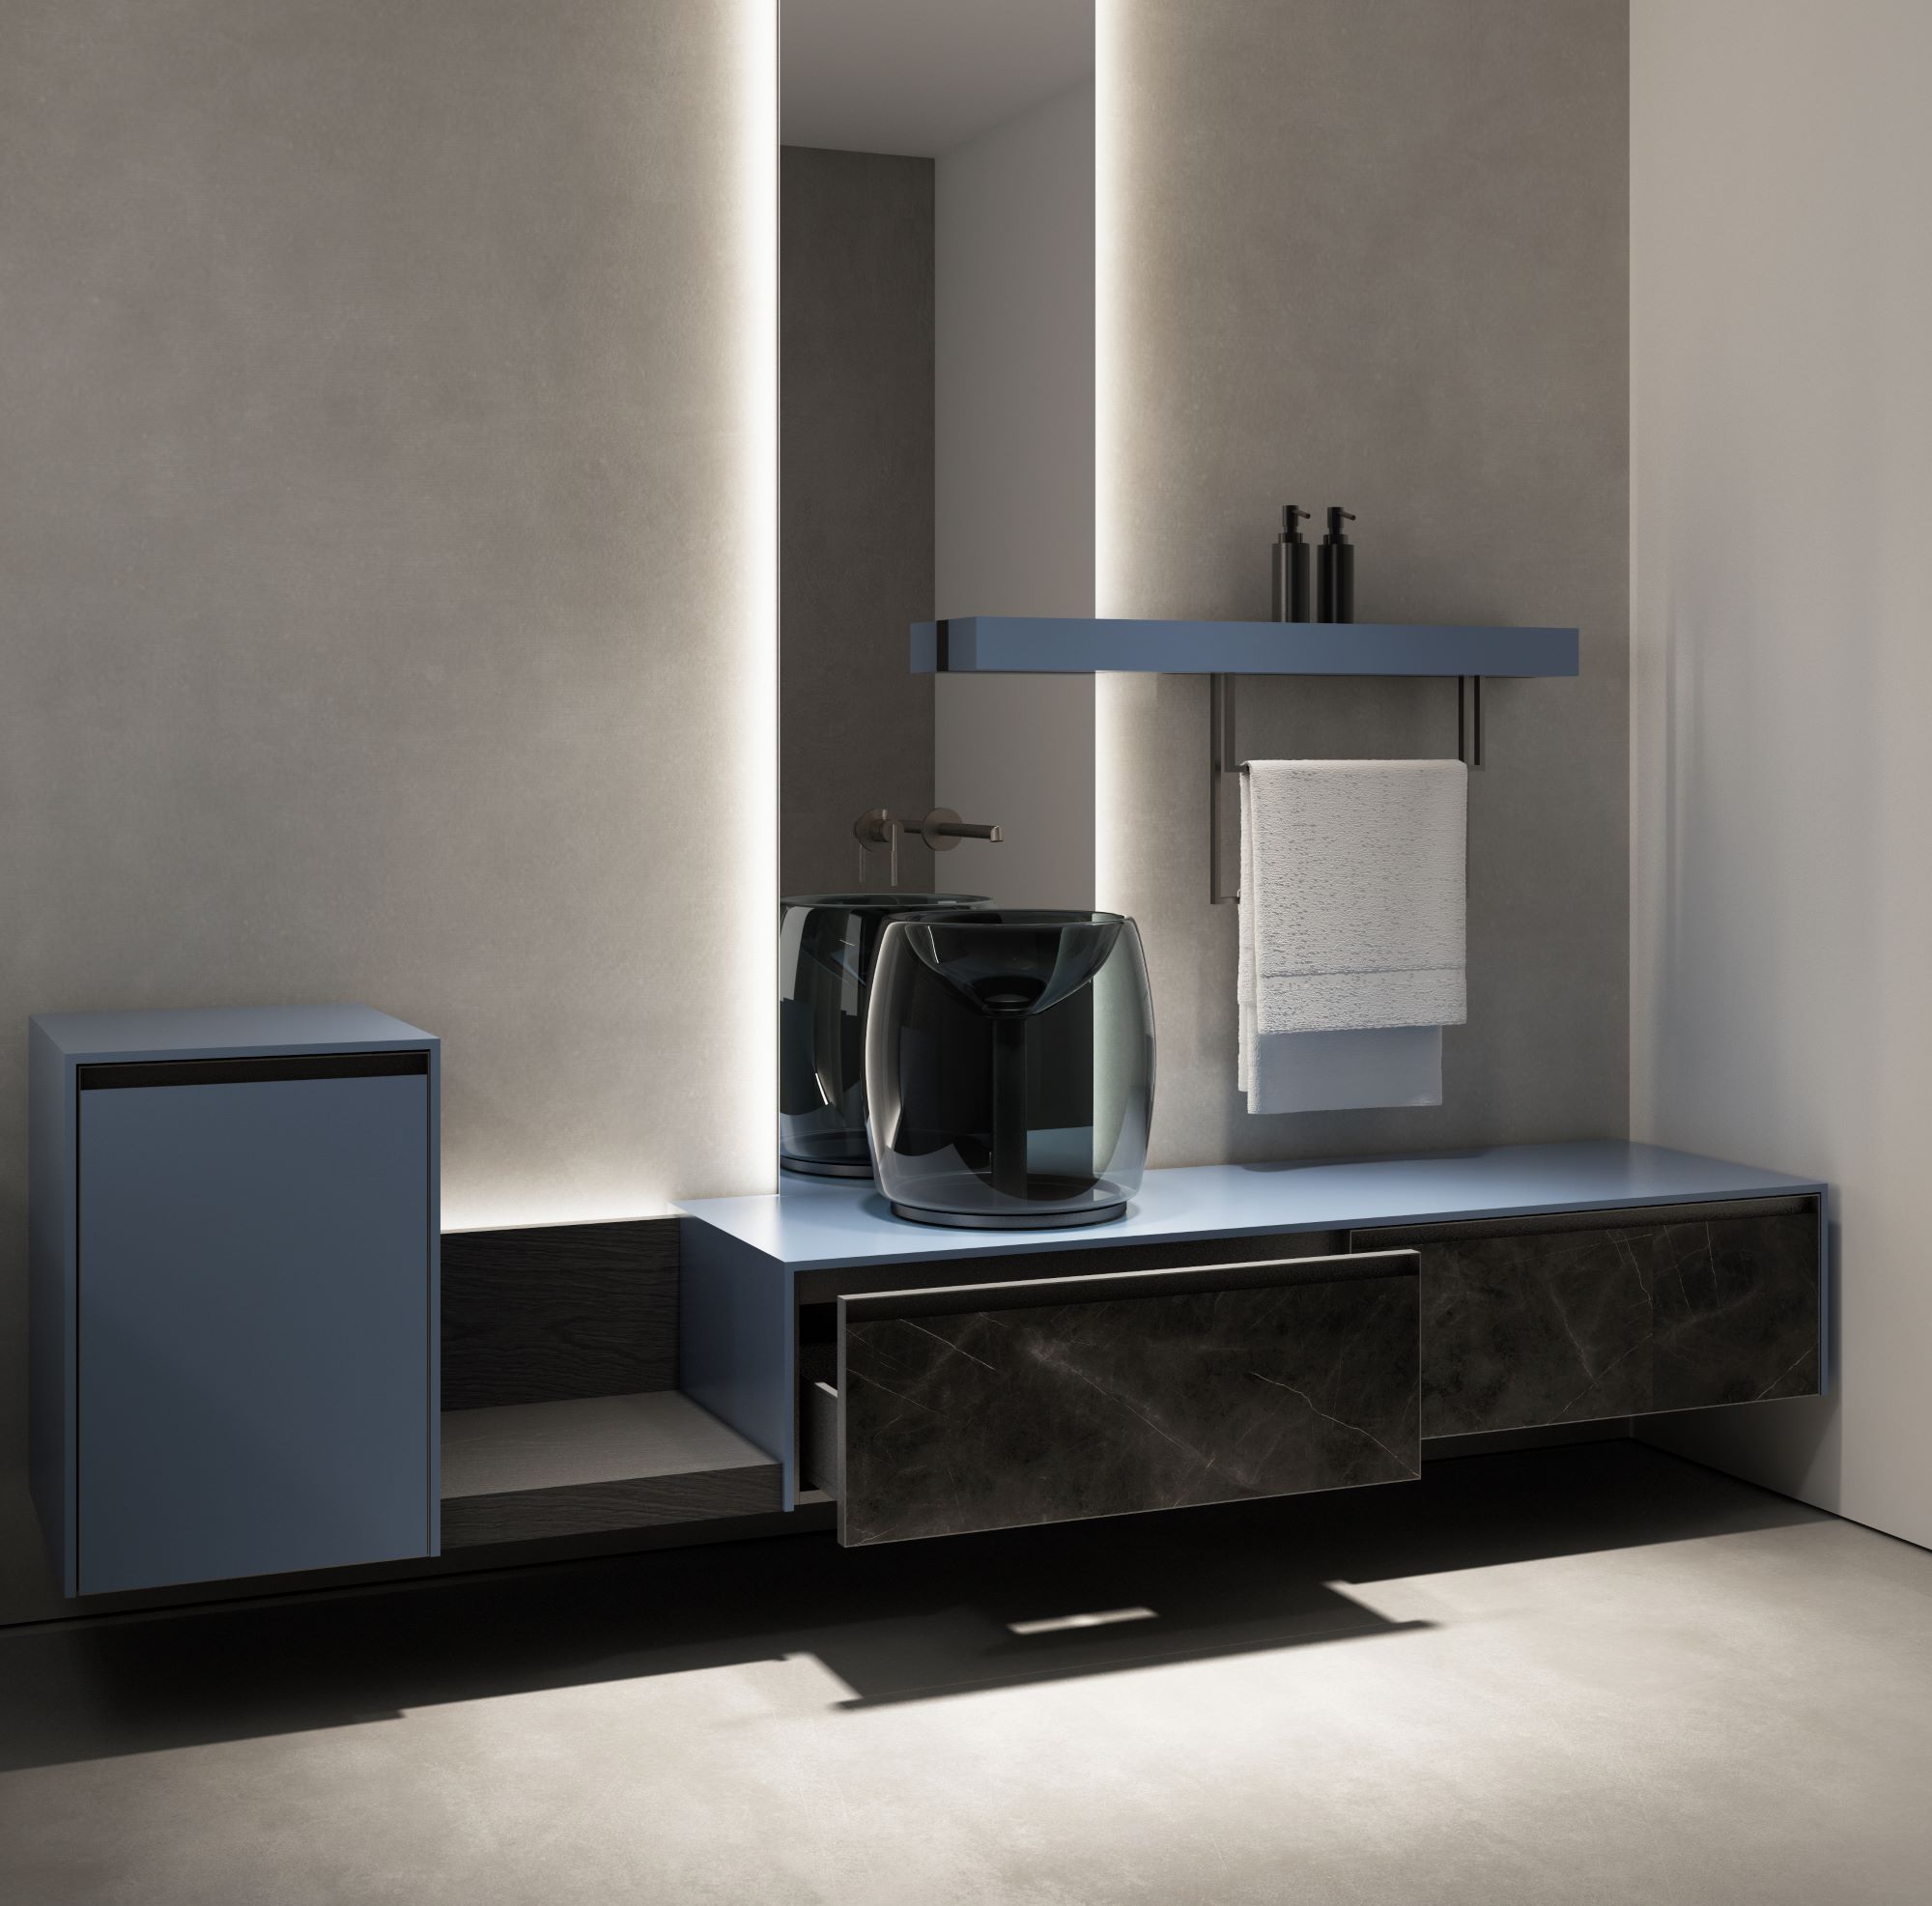 Tosca Contemporary Bathroom Furniture from C.P. Hart